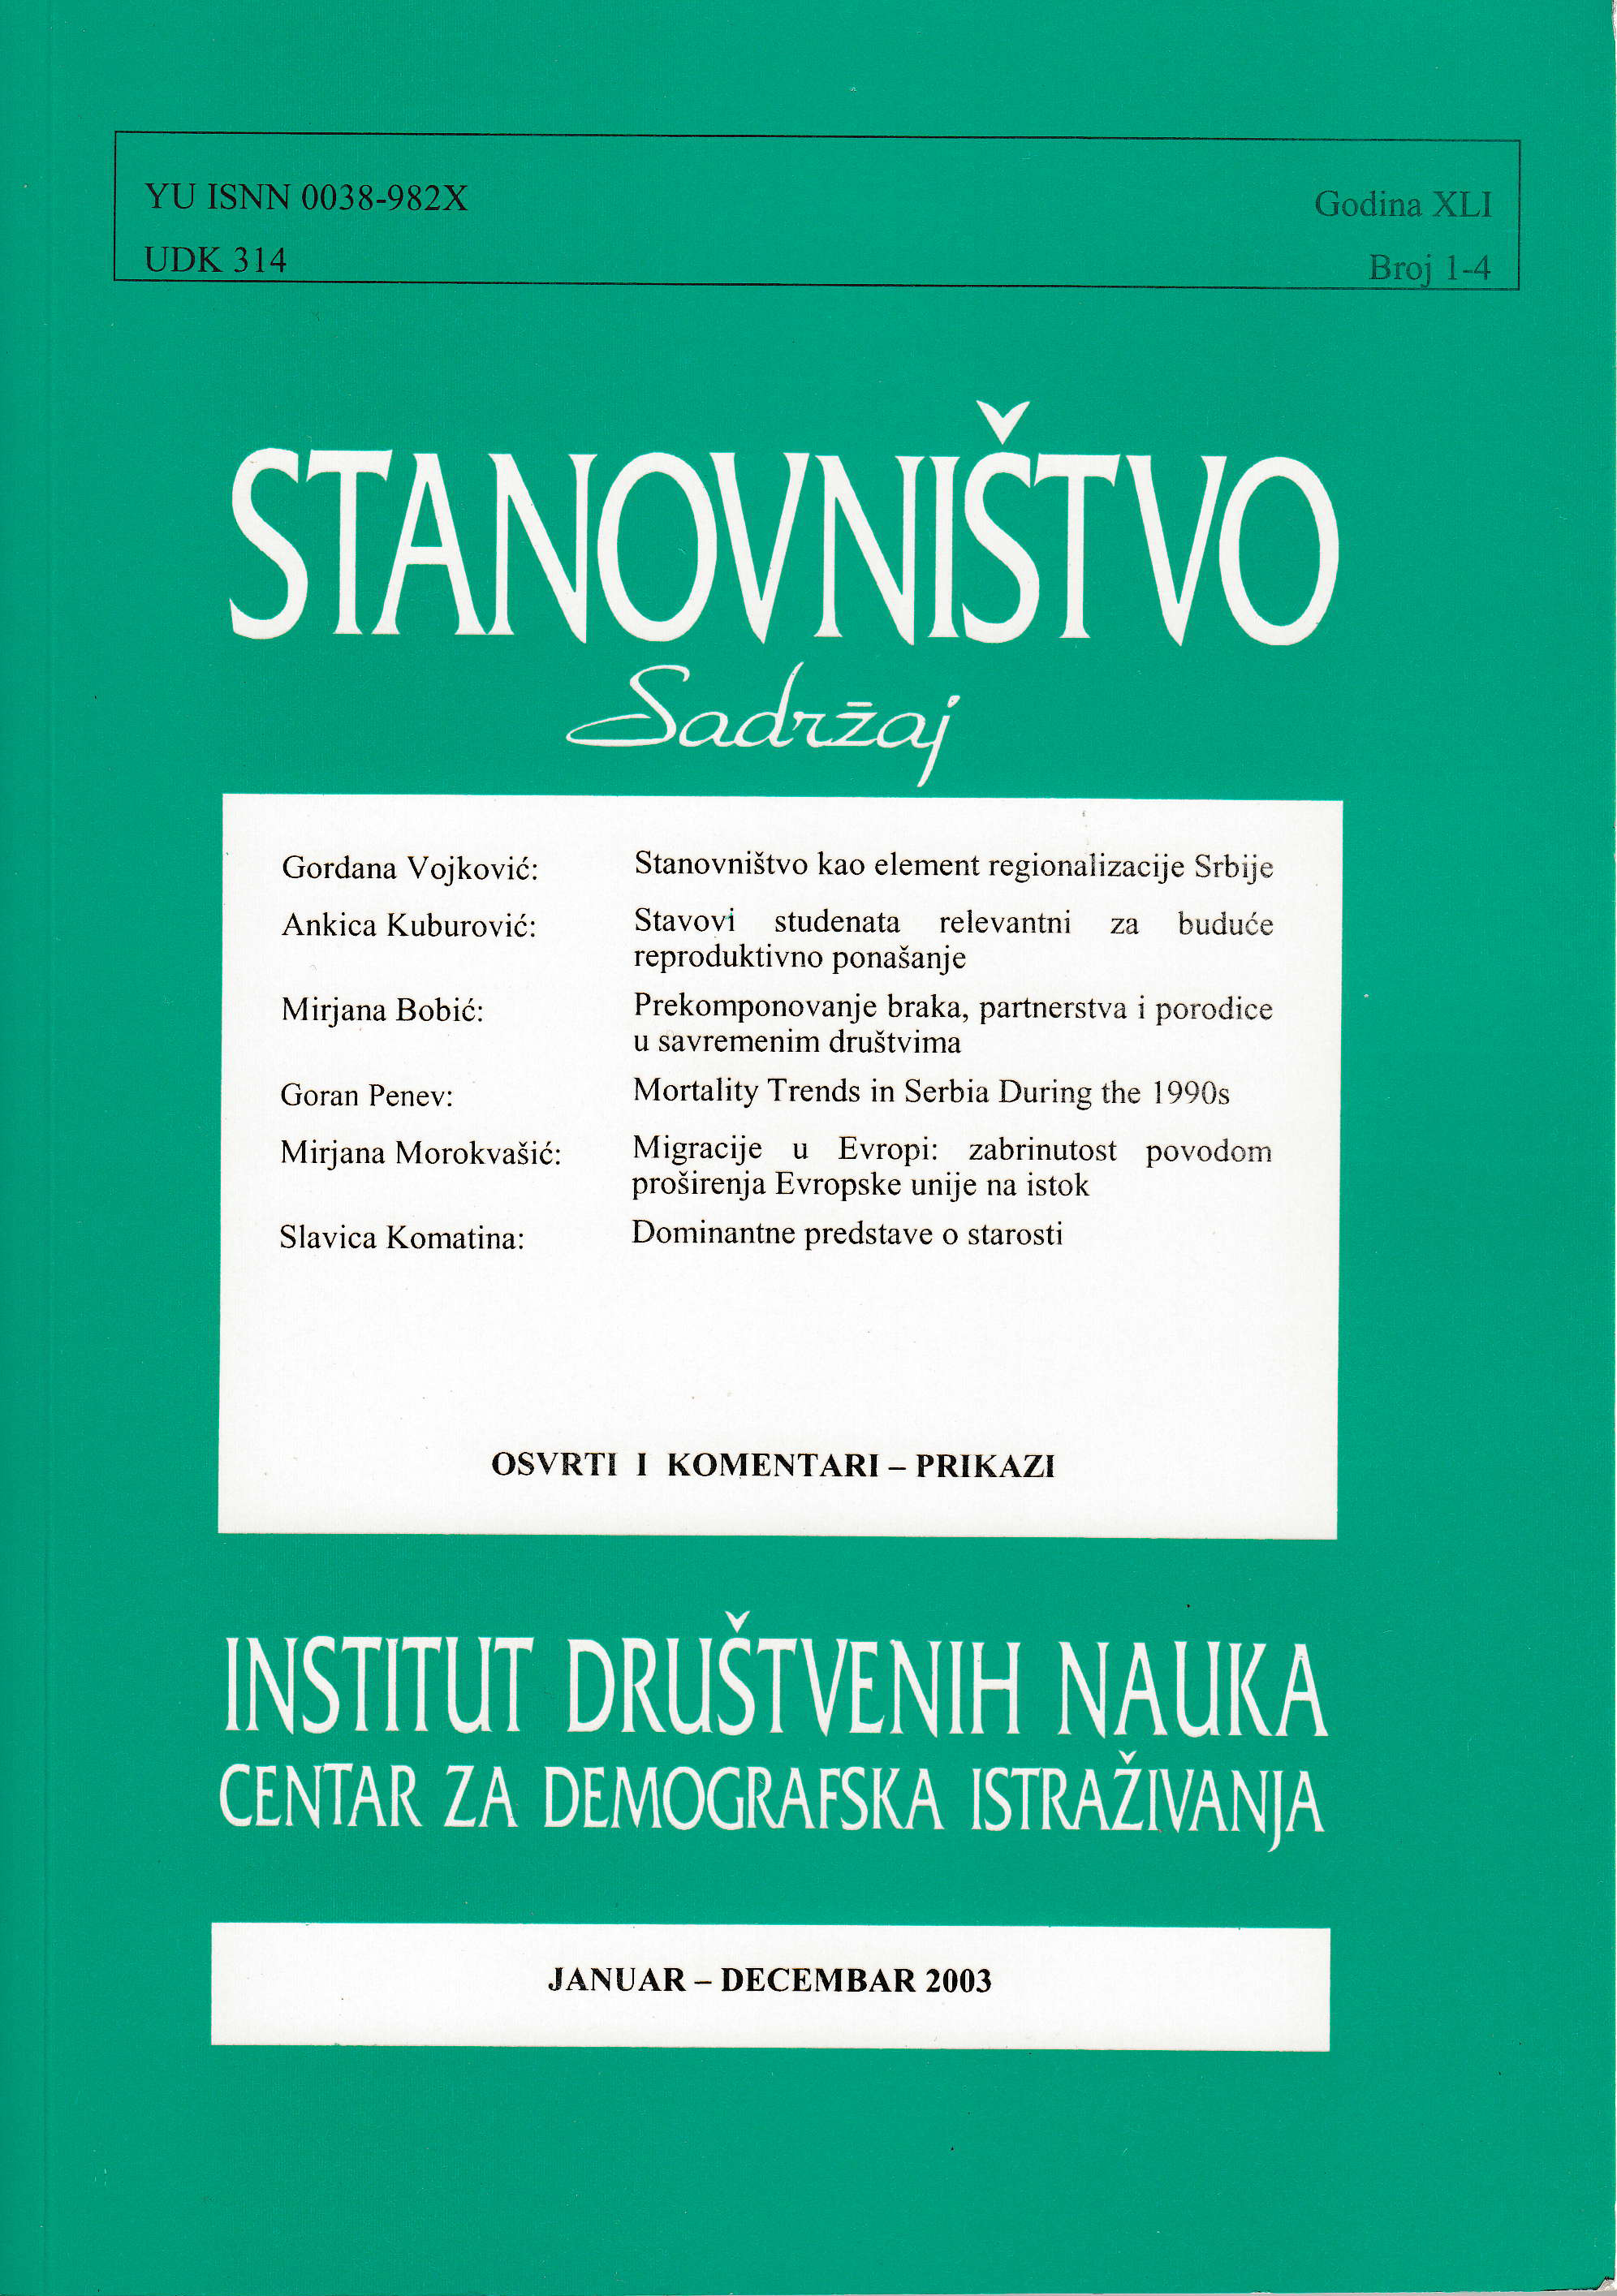 "Regional Development and Demographic Trends of the Balkan Countries", Niš, June 20, 2003 Cover Image